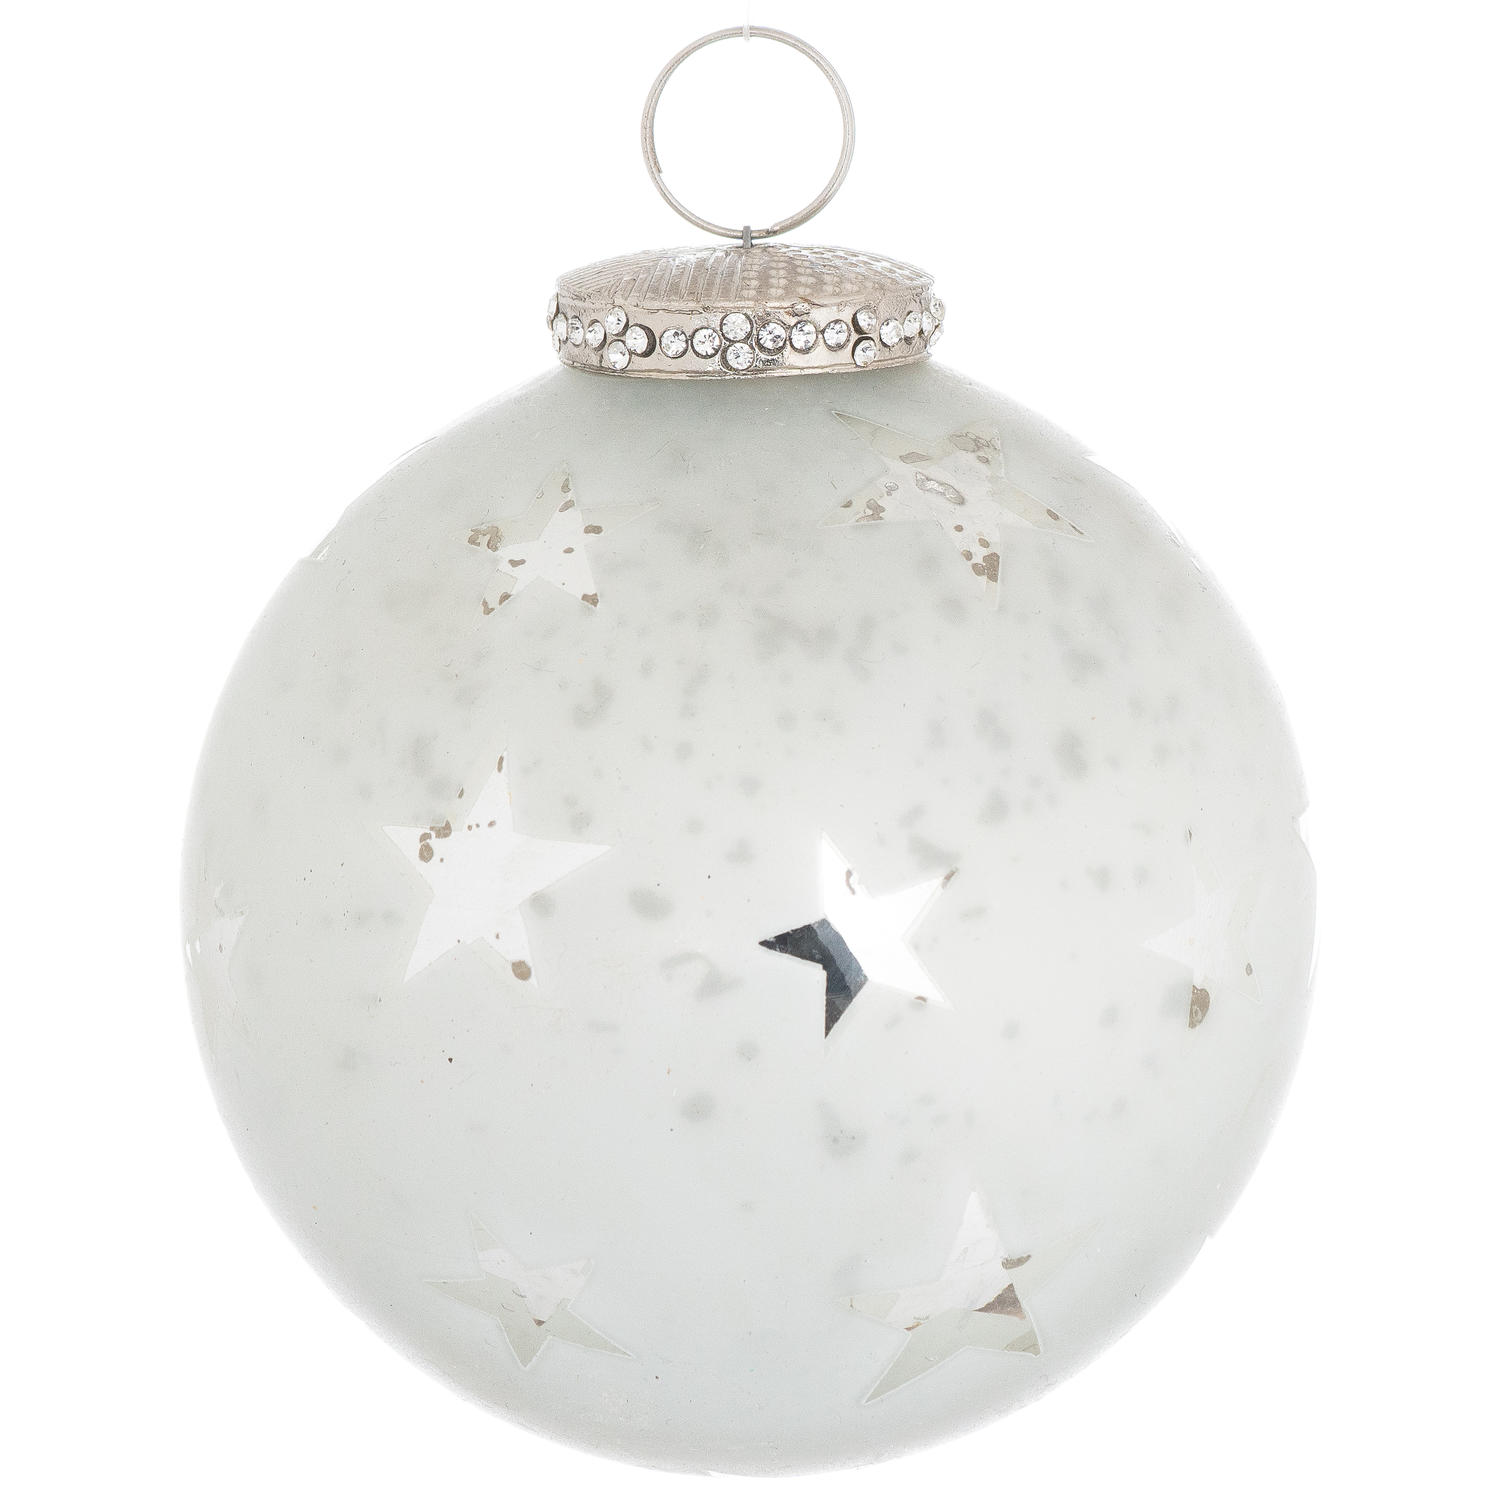 The Noel Collection White Star Medium Bauble - Image 1